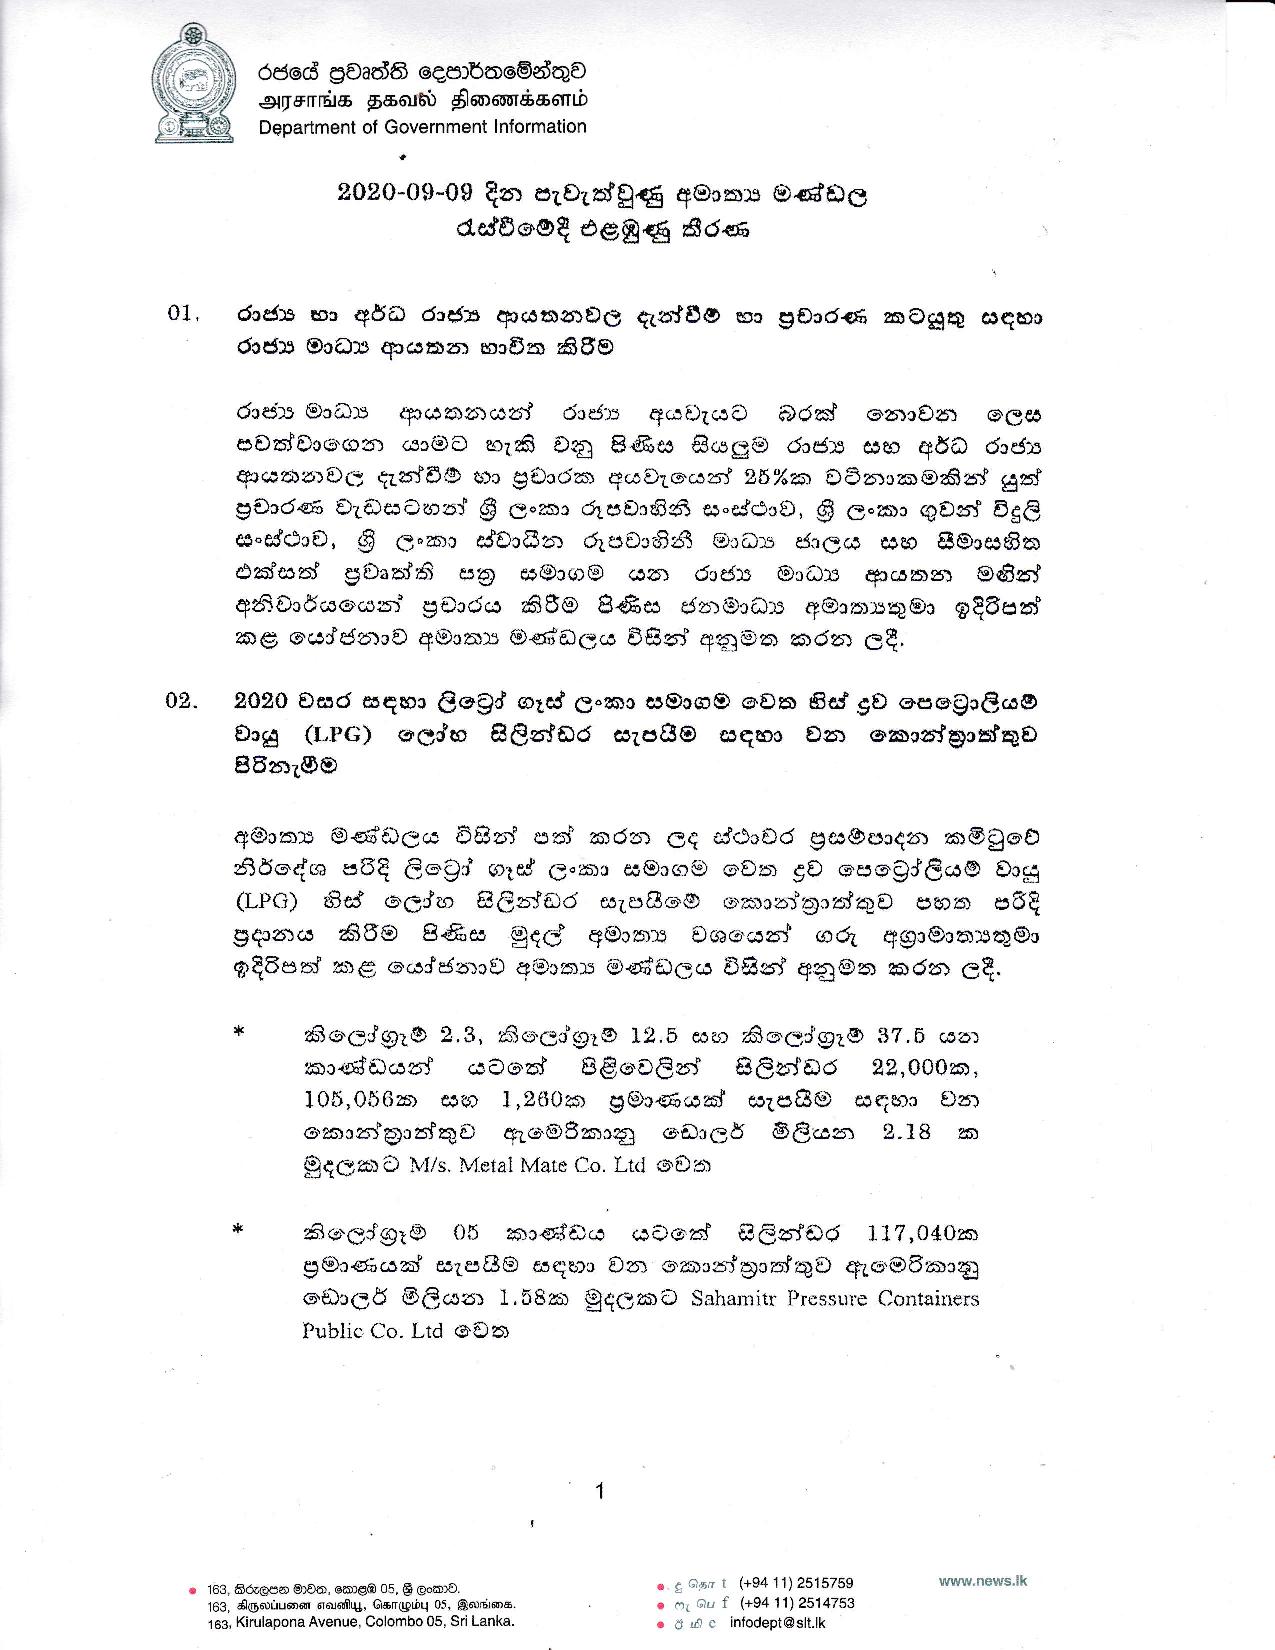 Cabinet Decision on 09.09.2020 page 001